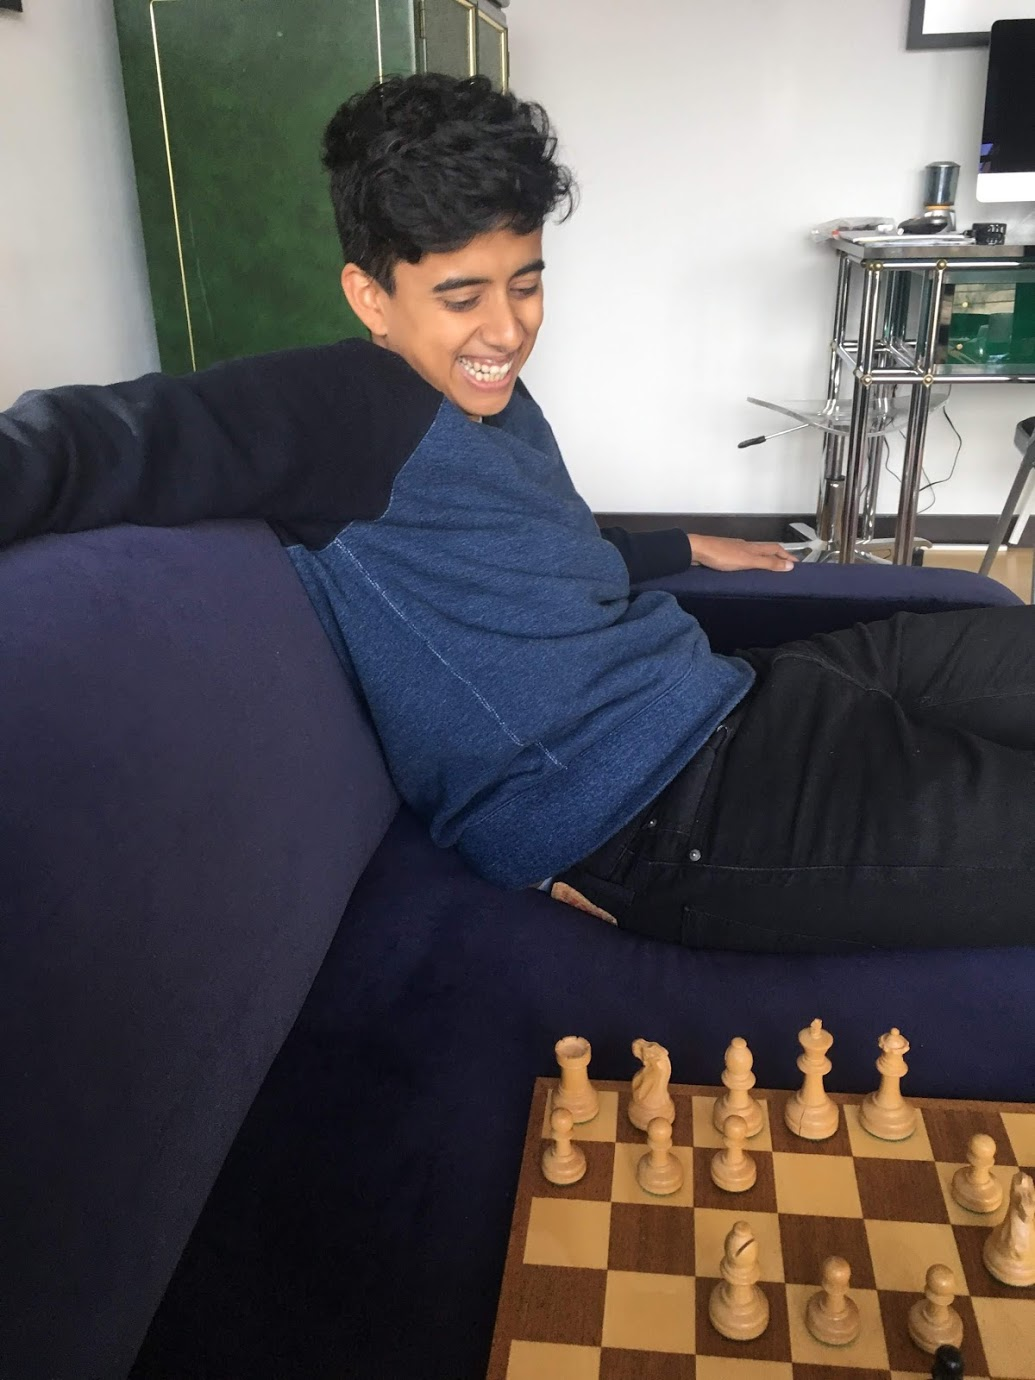 Image description: T is indoors, sitting on a purple sofa, right arm resting on the back of the sofa, looking down and smiling toward a chessboard.